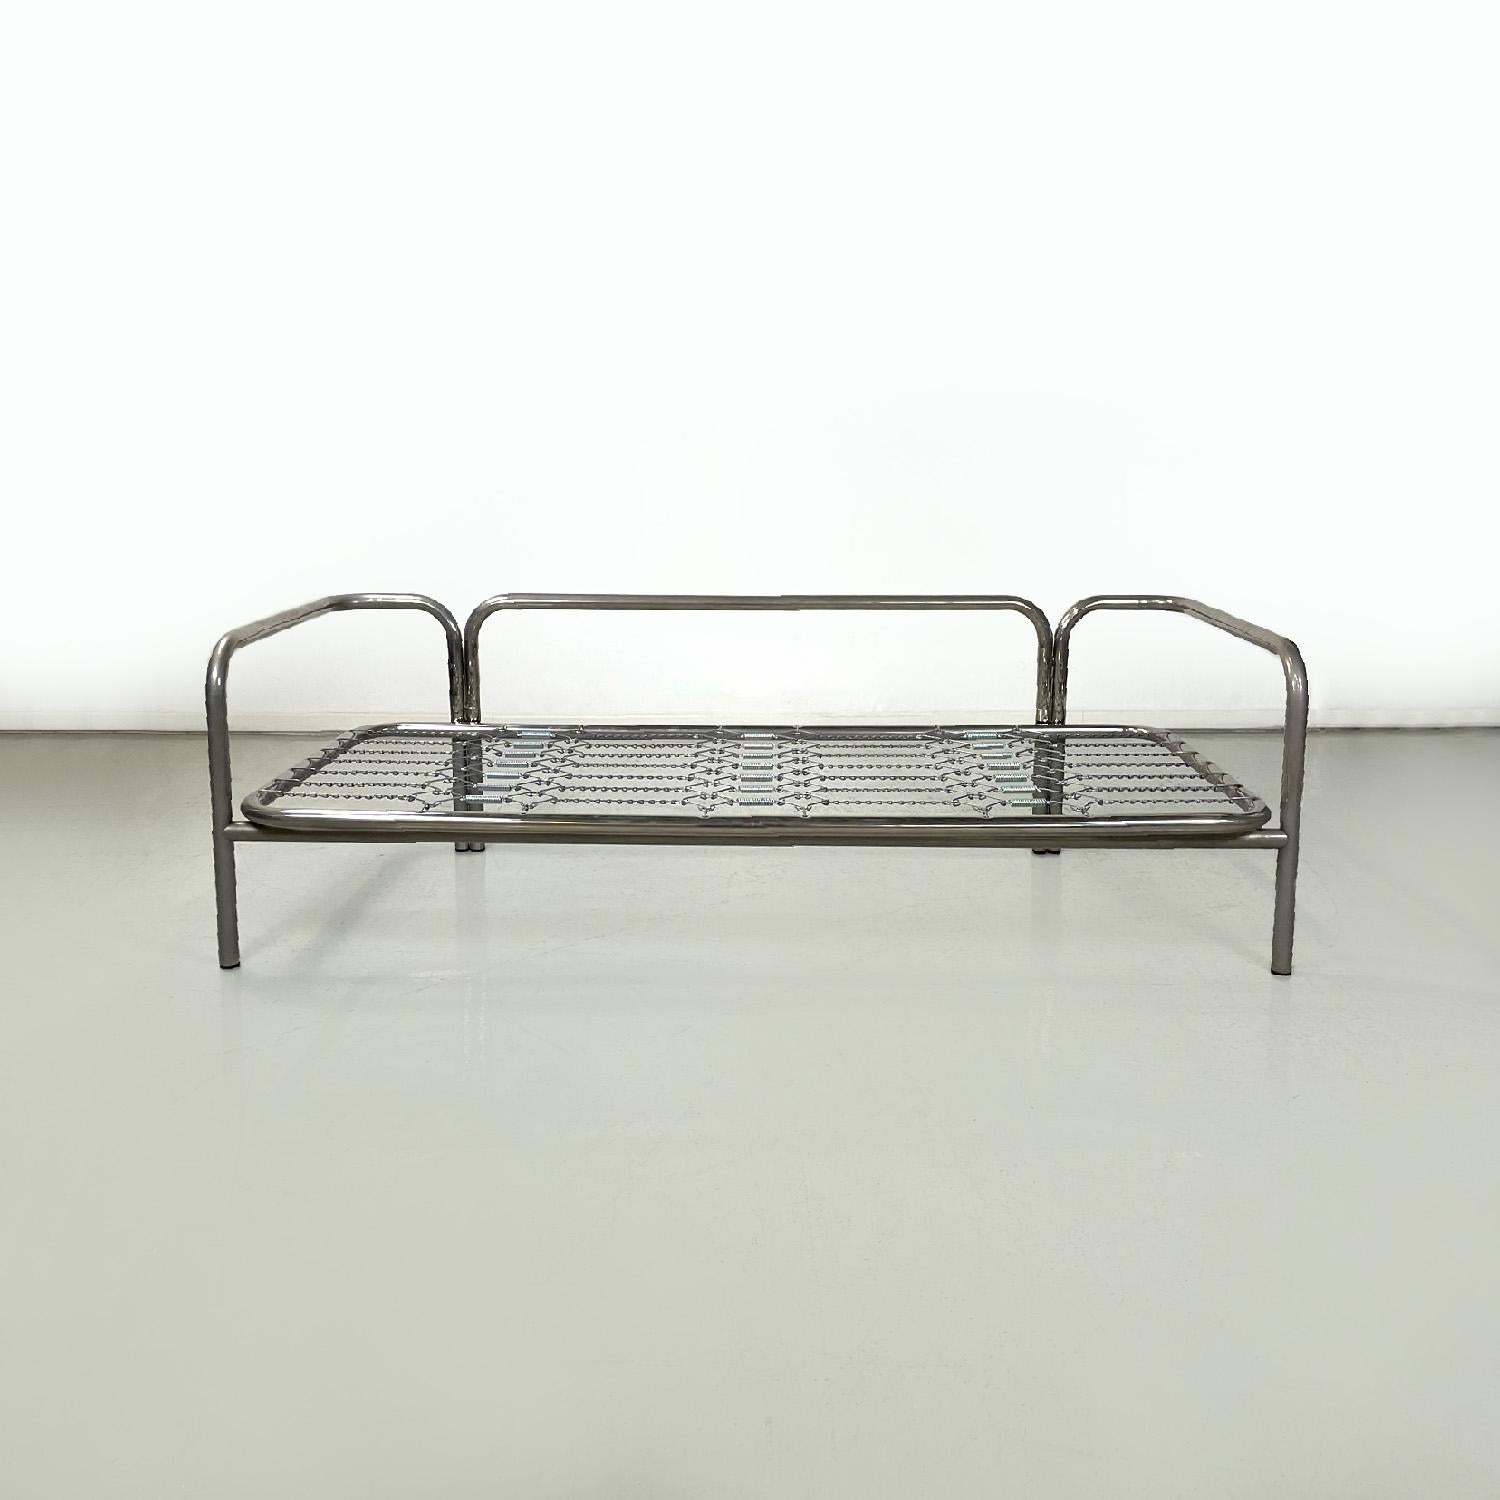 Italian modern daybed sofa Locus Solus by Gae Aulenti for Poltronova, 1970s
Daybed mod. Locus Solus with patina chromed metal structure. The structure is entirely made of tubular which is shaped by bending to form the backrest and armrests. The seat